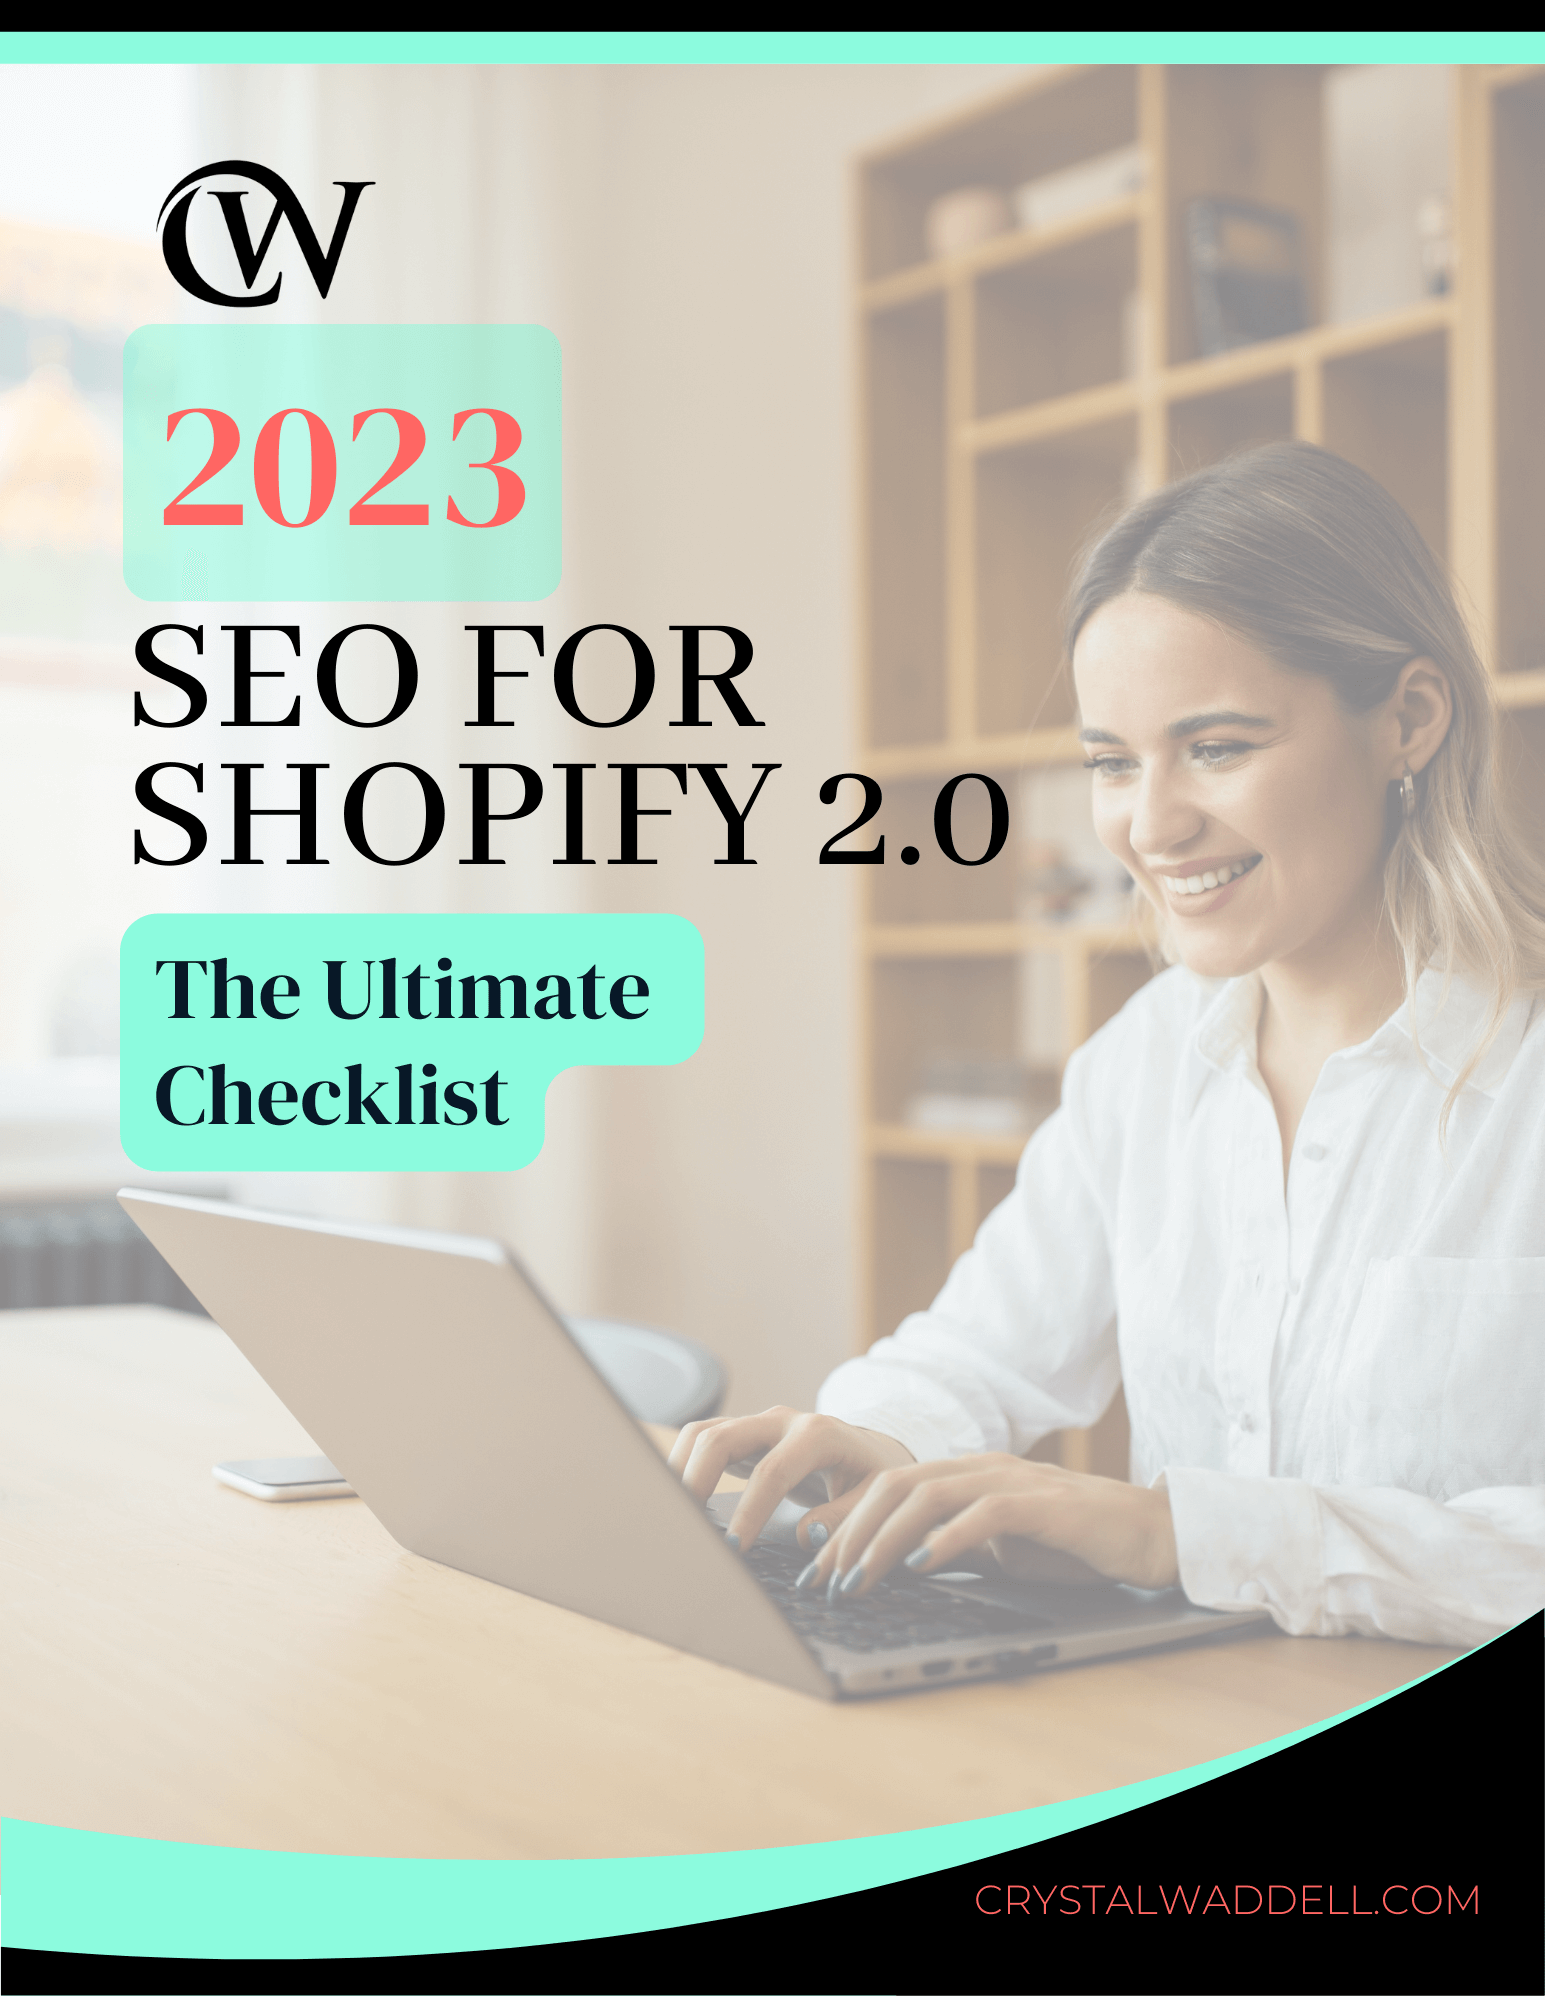 SEO For Shopify 2.0: The Ultimate Checklist!